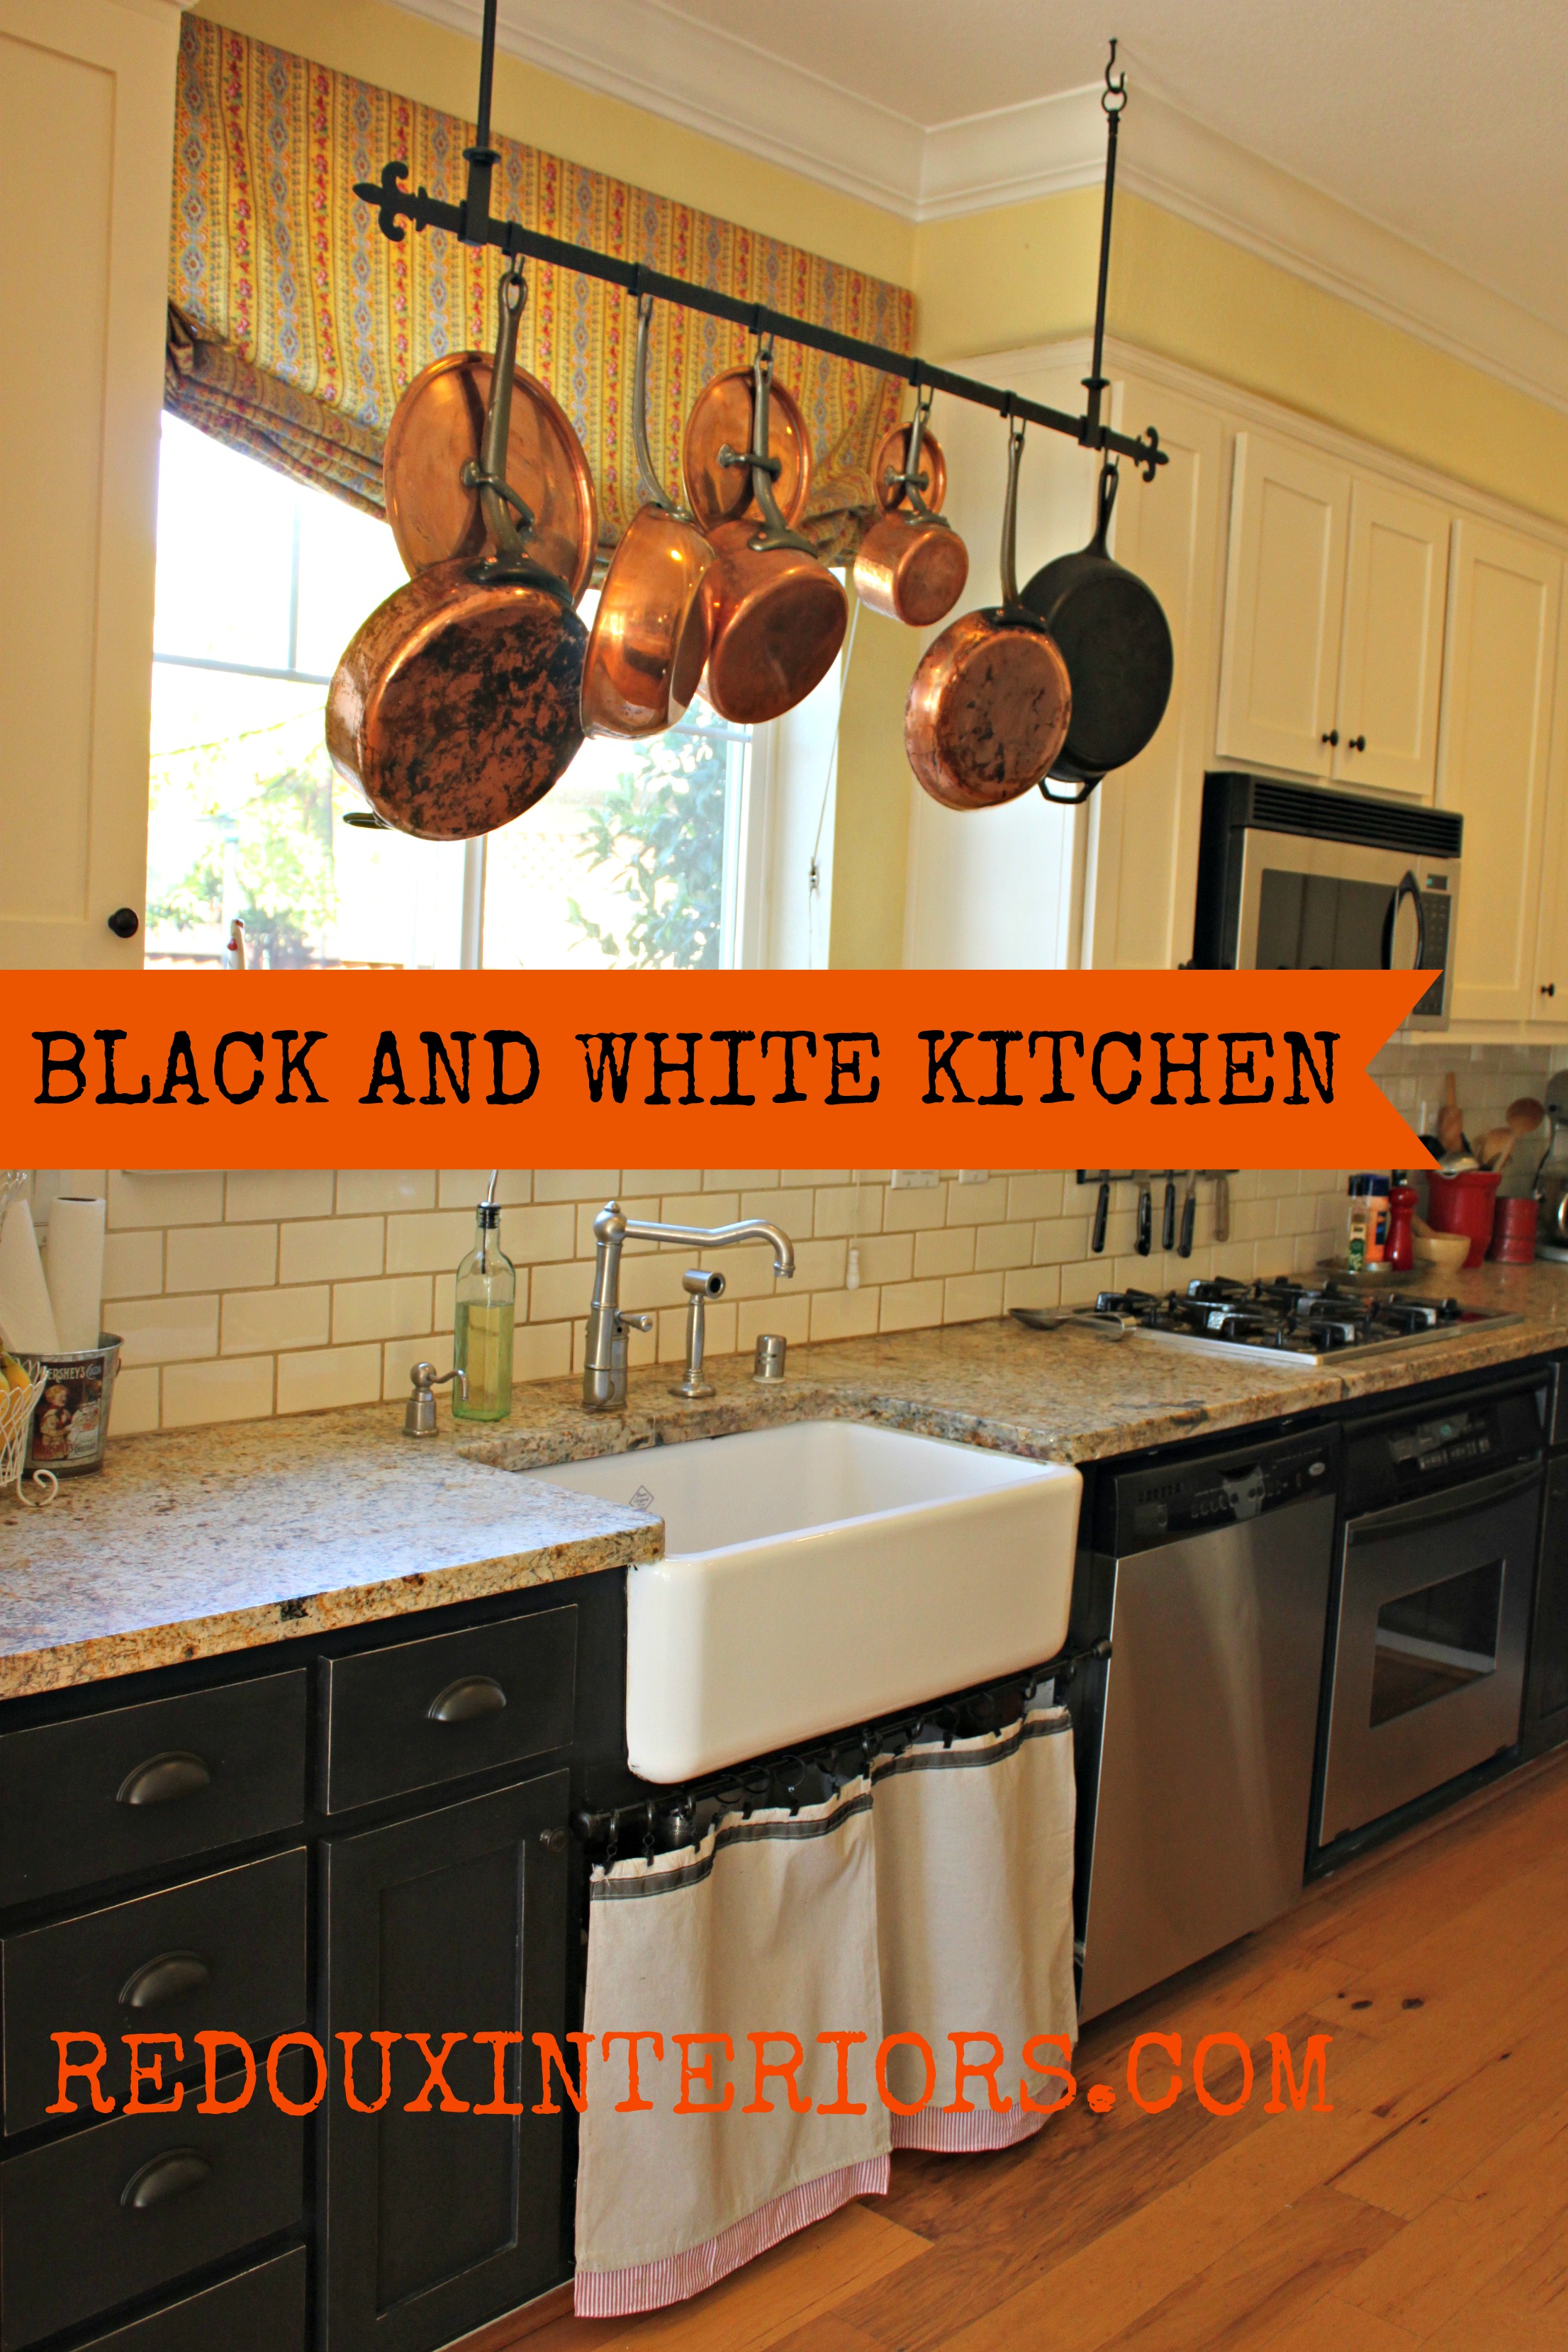 Black and White Kitchen Makeover. The single bar pot rack would be ...